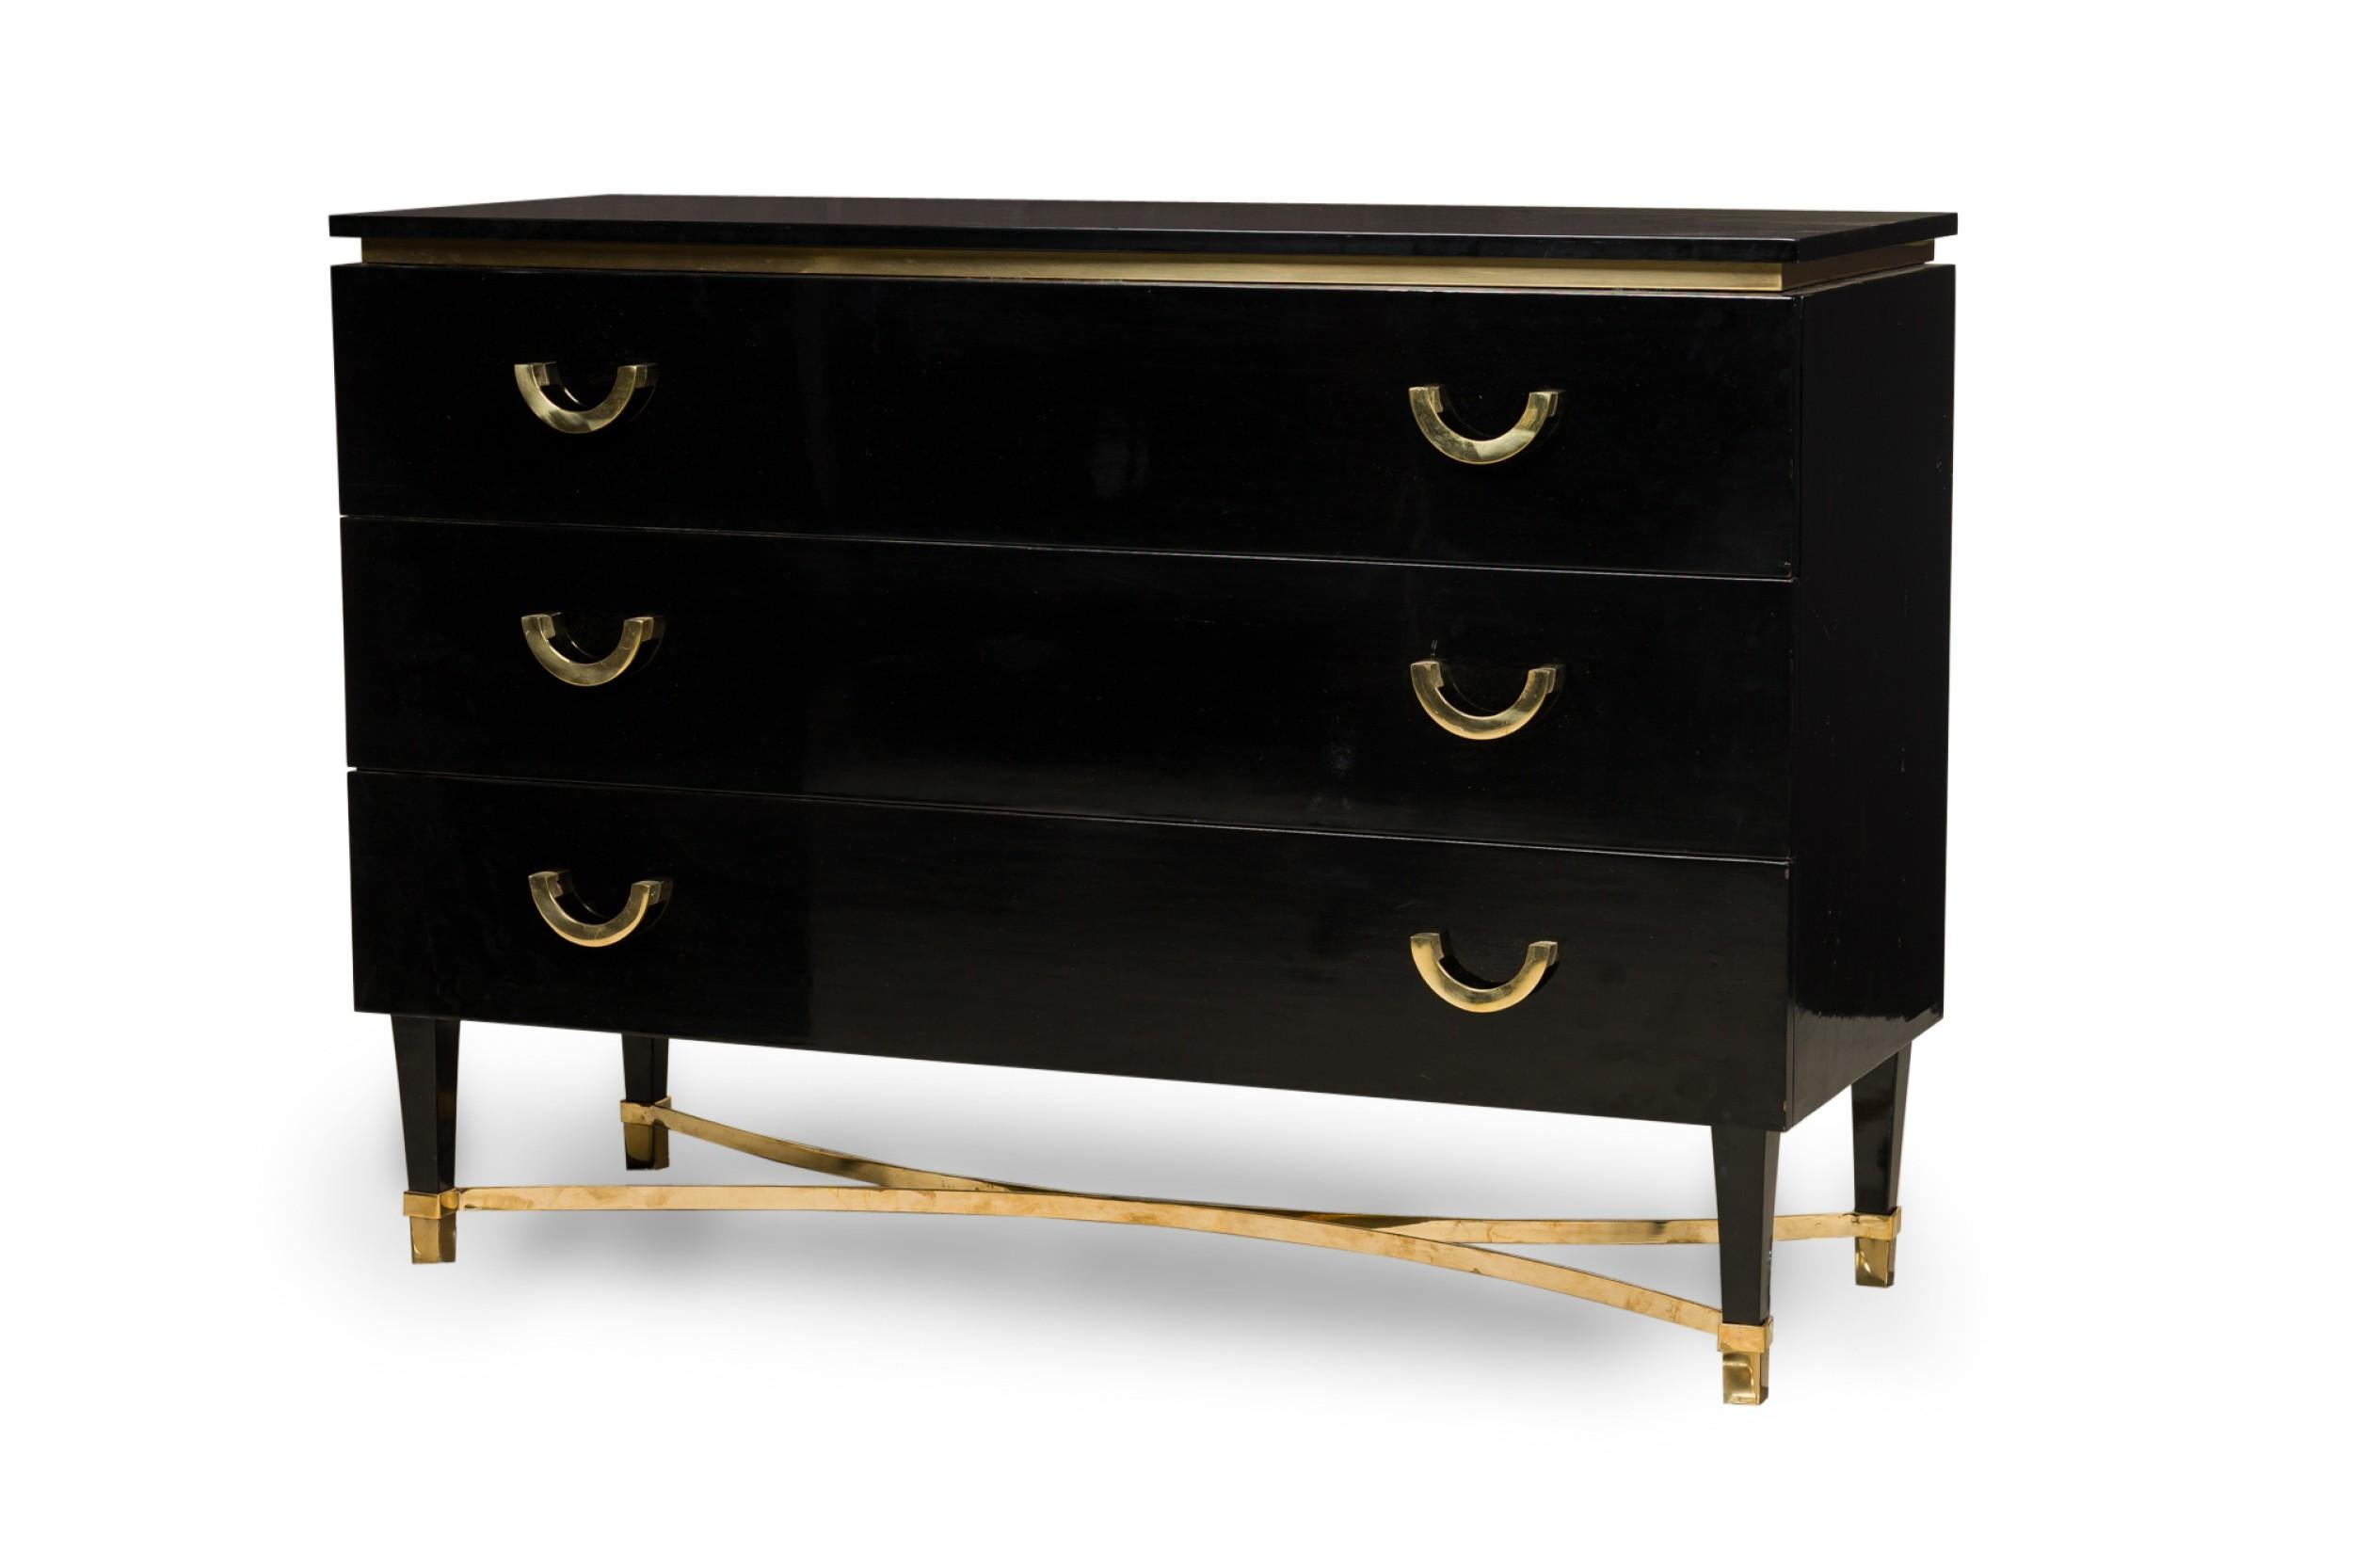 European Pair of Continental Ebonized Wood & Bronze Mounted Dressers (Manner of Gucci) For Sale